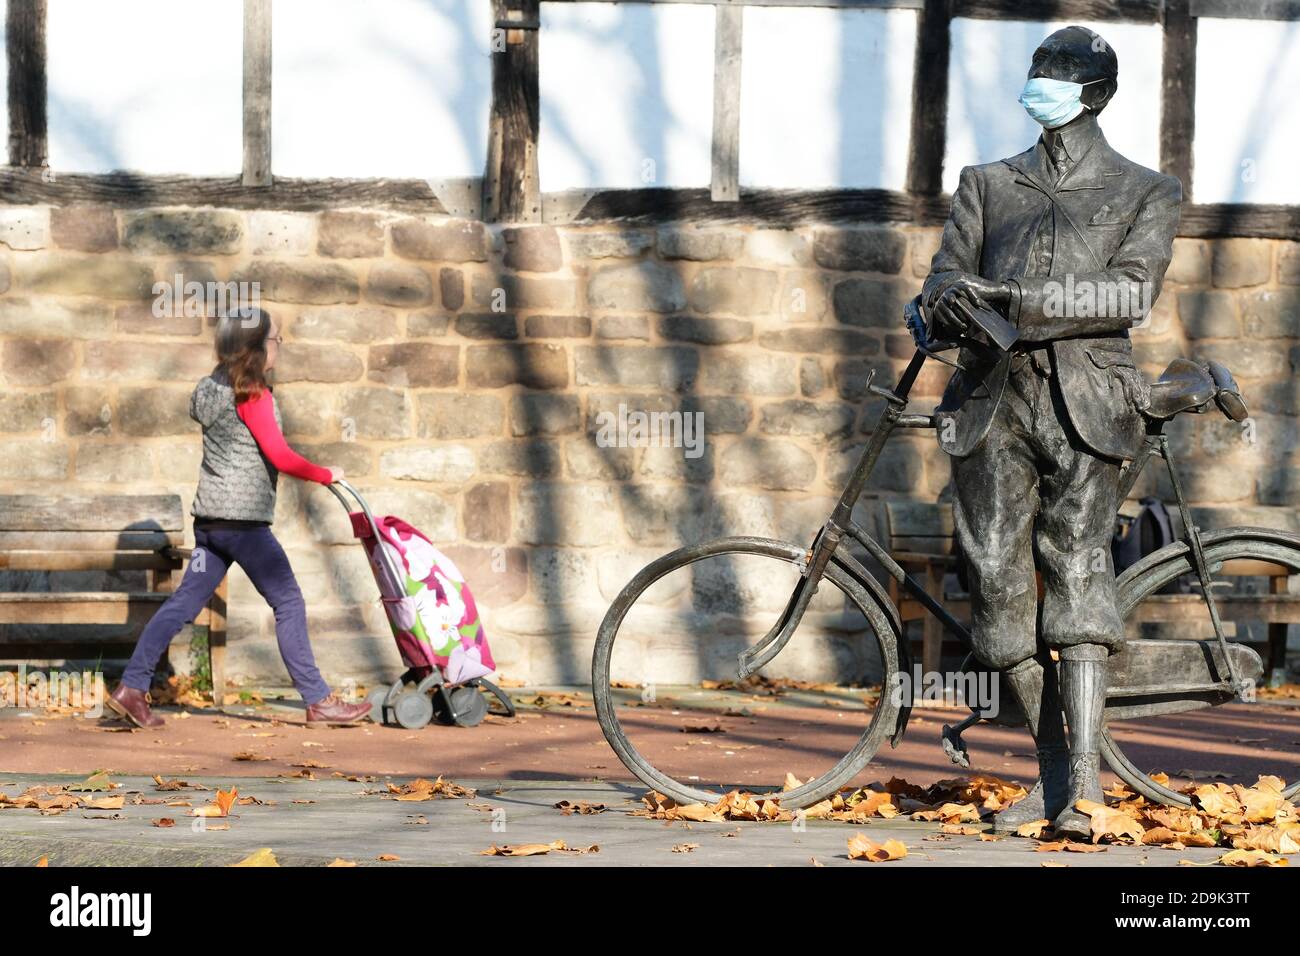 Hereford Herefordshire, Friday 6th November 2020 - UK Weather - Residents and statues enjoy the bright autumn sunny weather today. Golden autumn leaves surround a statue of composer Sir Edward Elgar complete with Covid facemask as local temperatures reach 10c. Forecast outlook is milder but with some rain this weekend. Photo Steven May / Alamy Live News Stock Photo